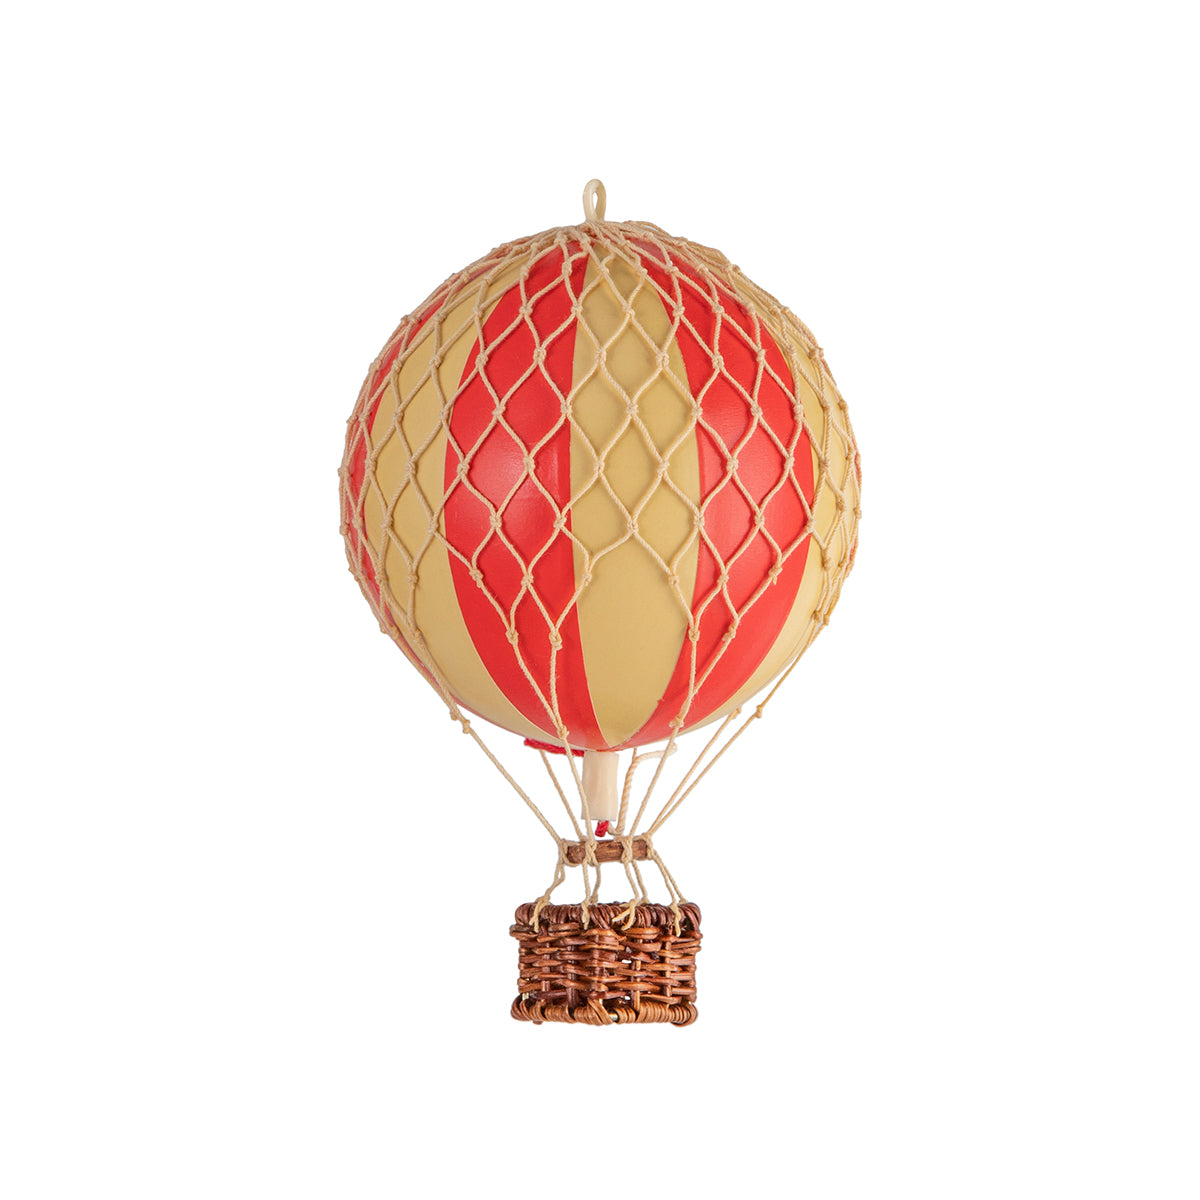 A Wonderen Extra Small Hot Air Balloon - Floating The Skies ornament adorned with a wicker basket, perfect for embarking on an adventure.